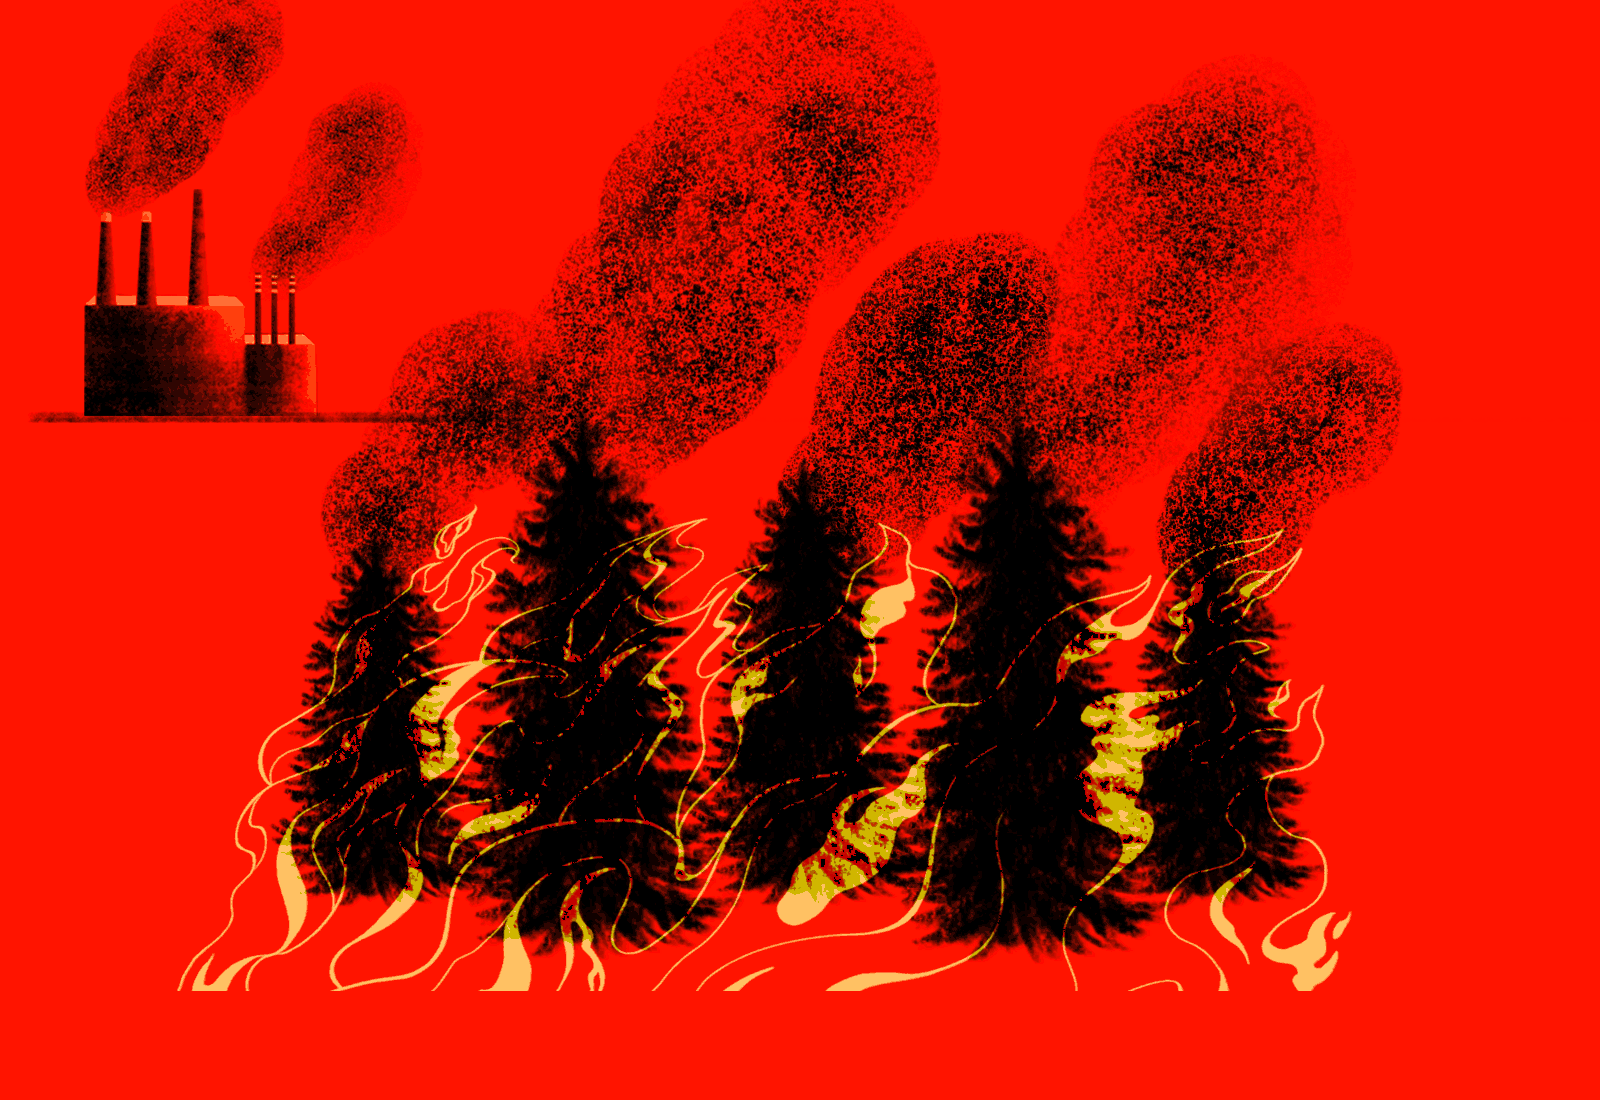 Animation: trees on fire with a coal plant in the background